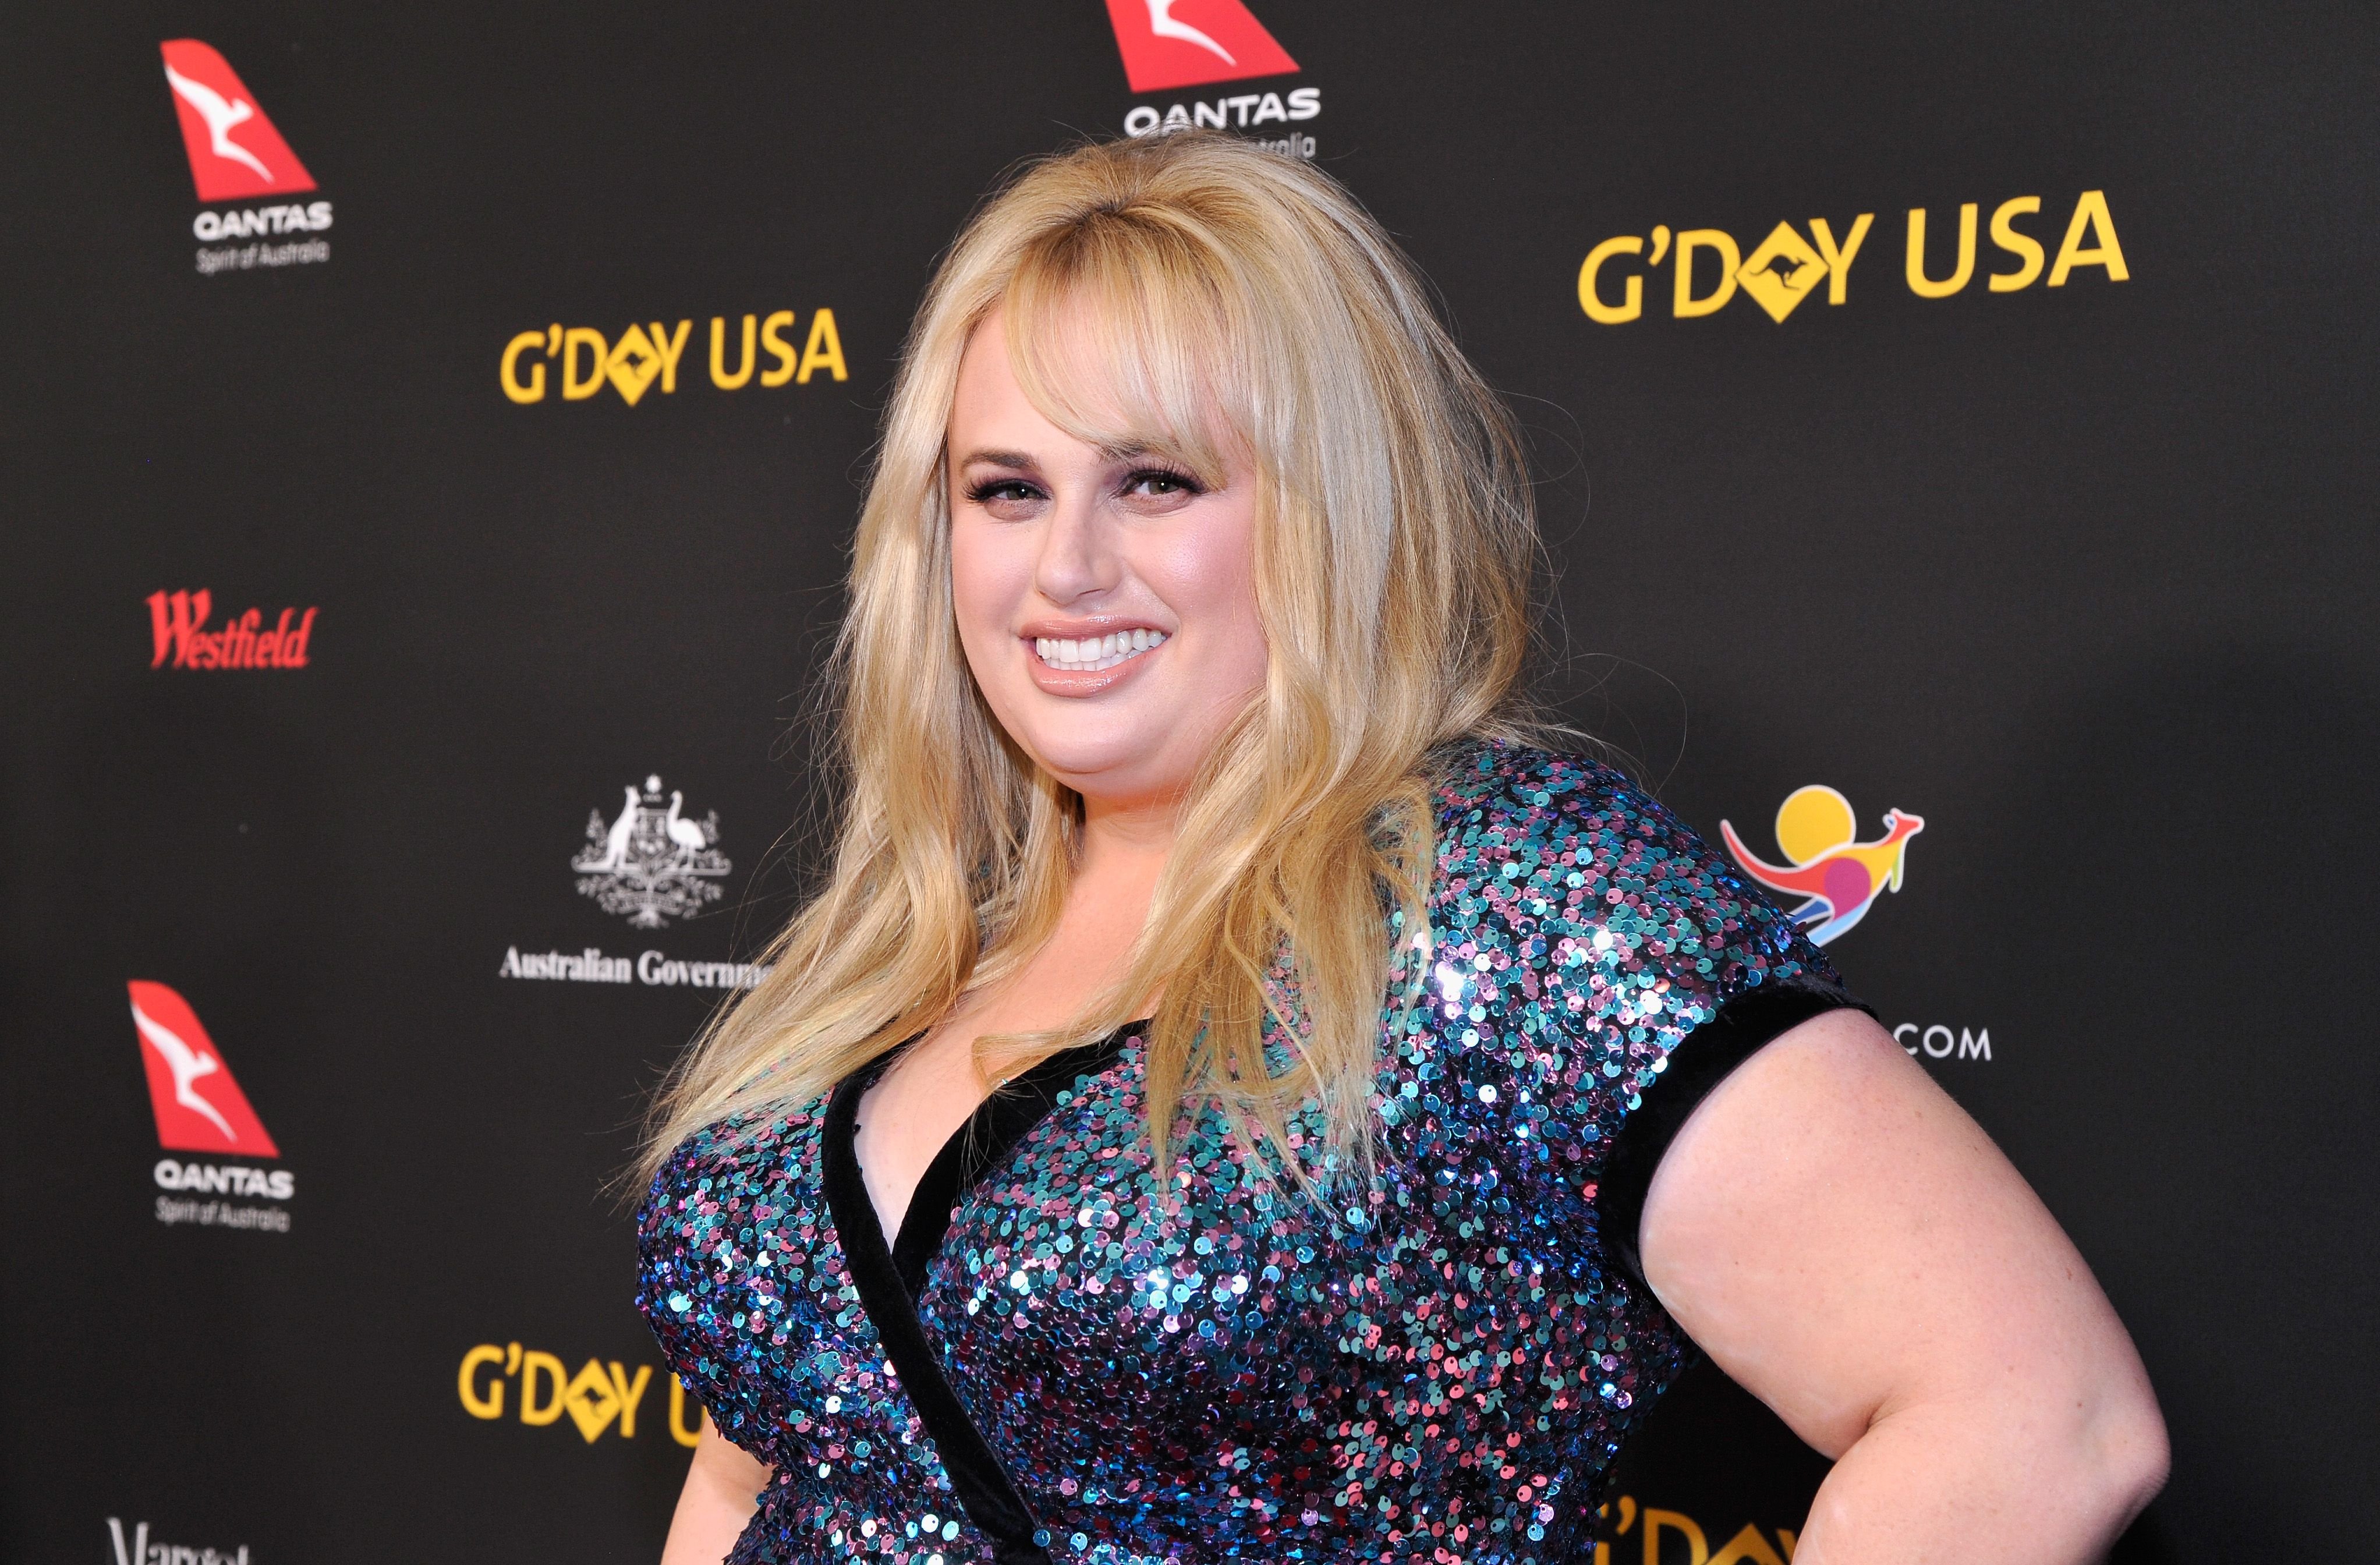 Rebel Wilson at the 2018 G'Day USA Black Tie Gala at InterContinental Los Angeles Downtown on January 27, 2018 in Los Angeles, California | Photo: Getty Images